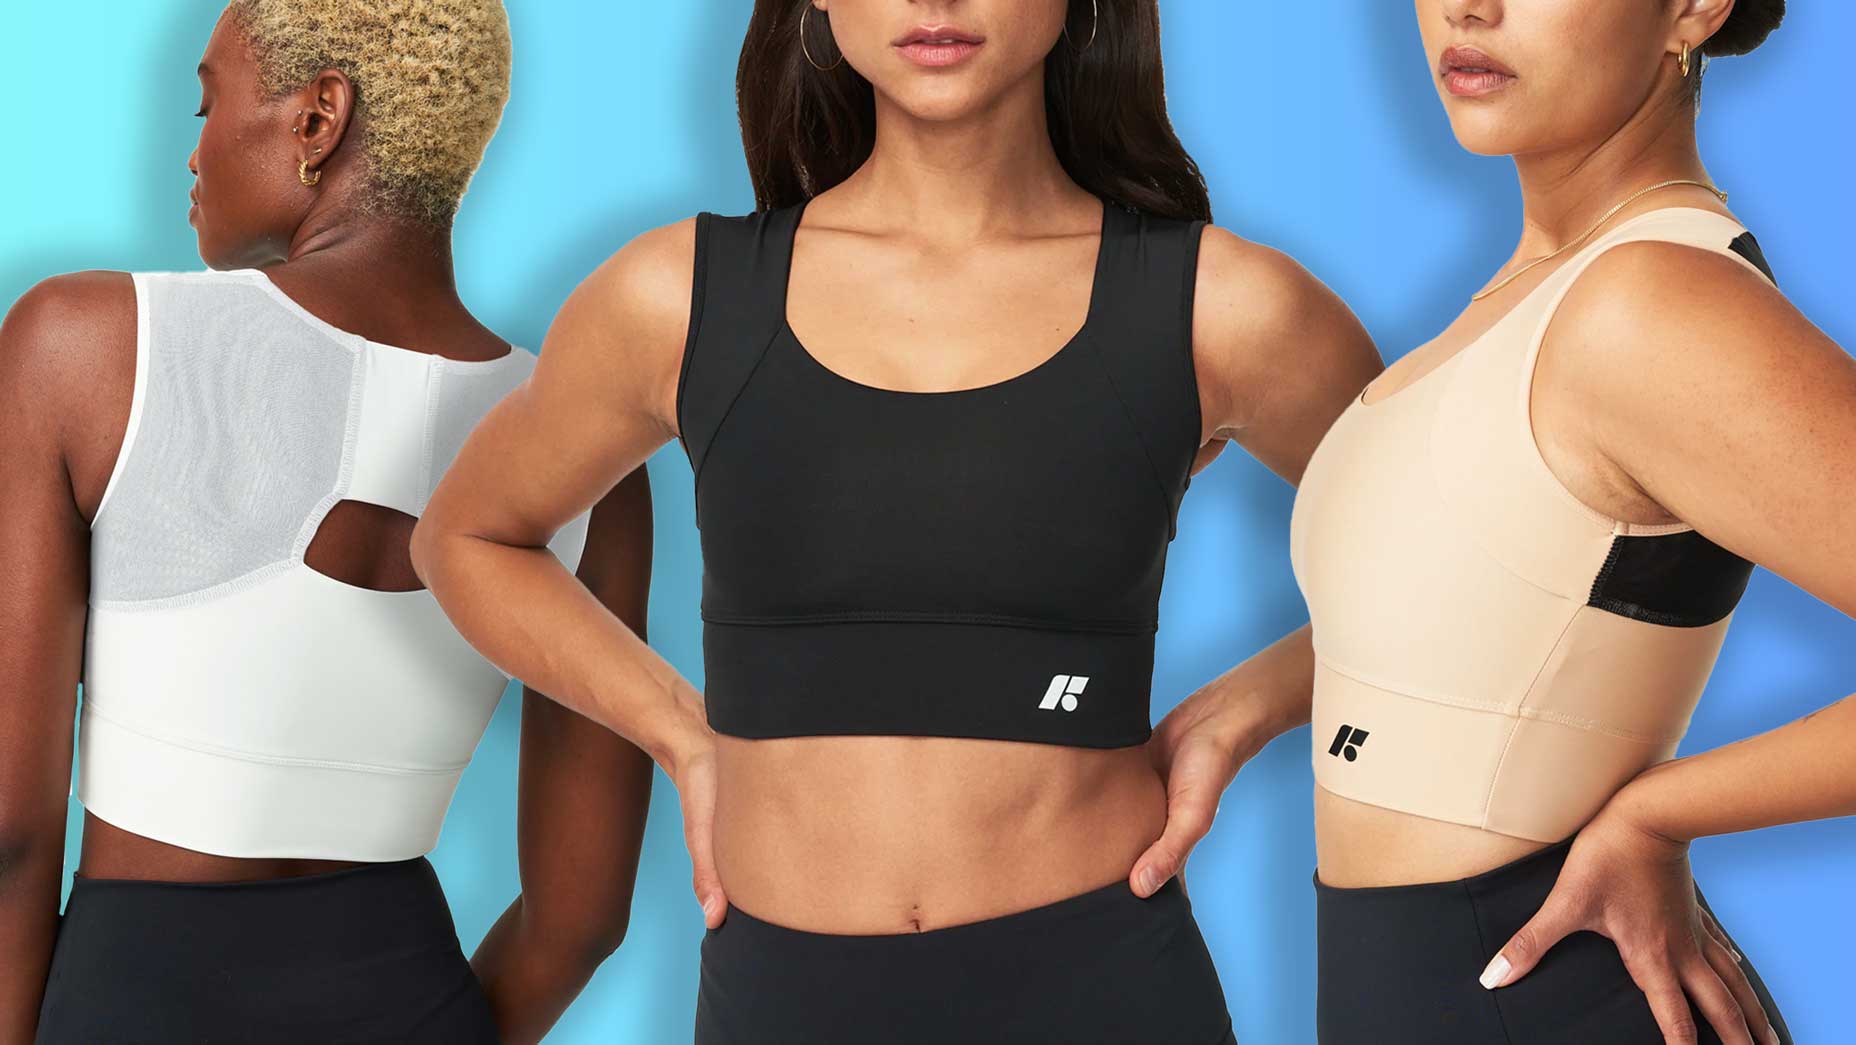 Can this posture-improving sports bra also improve my golf game?